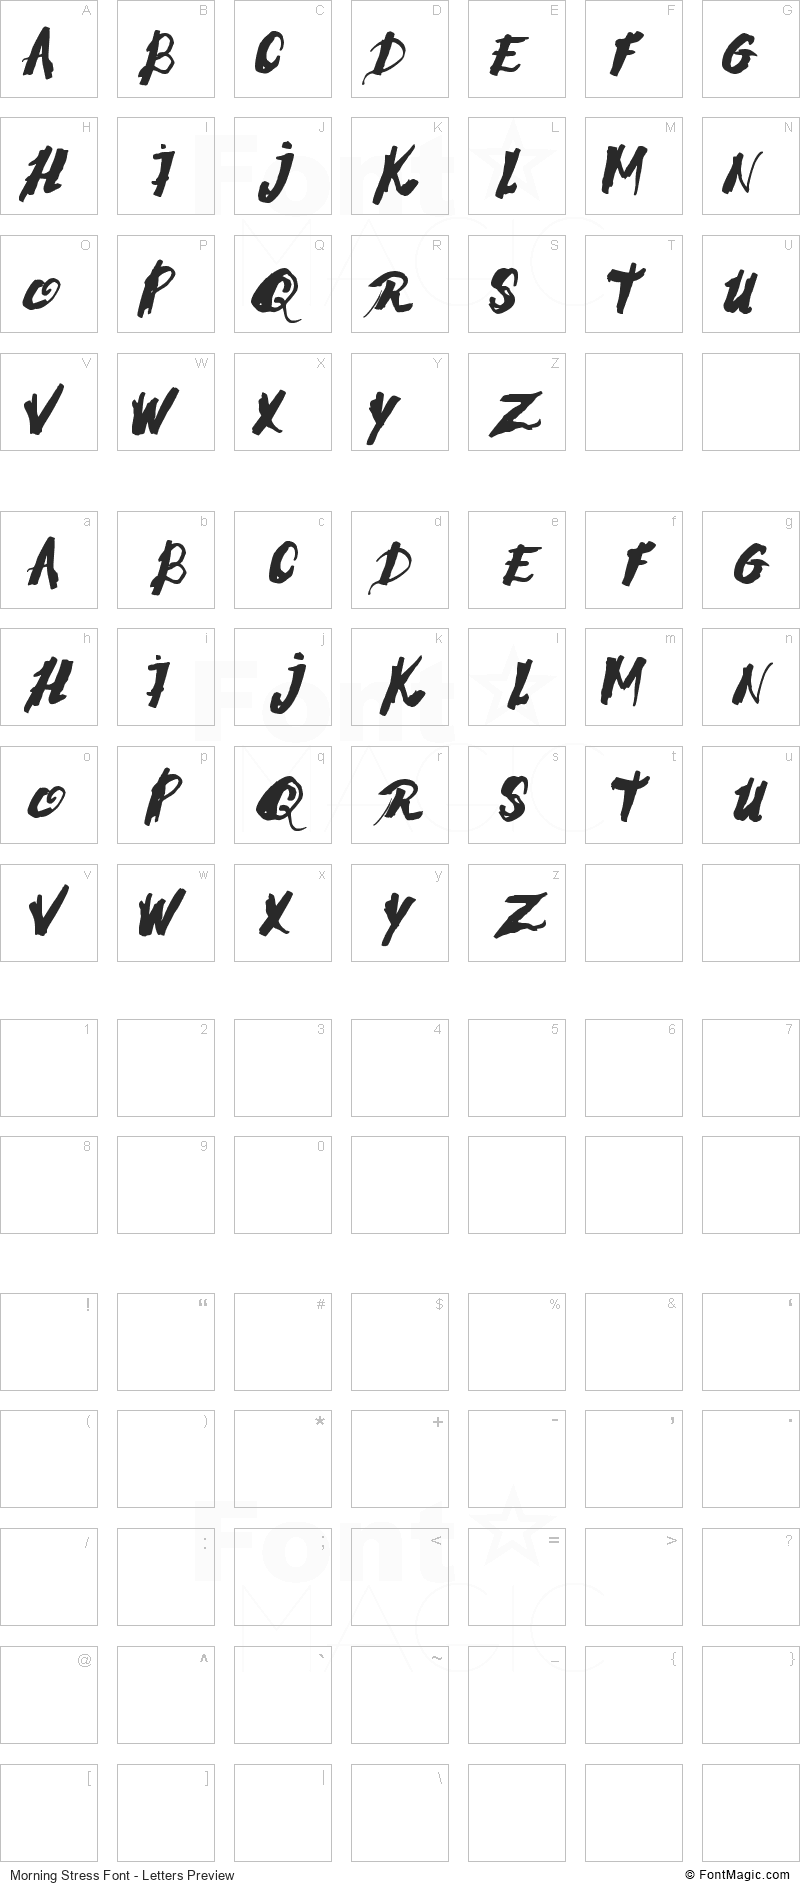 Morning Stress Font - All Latters Preview Chart